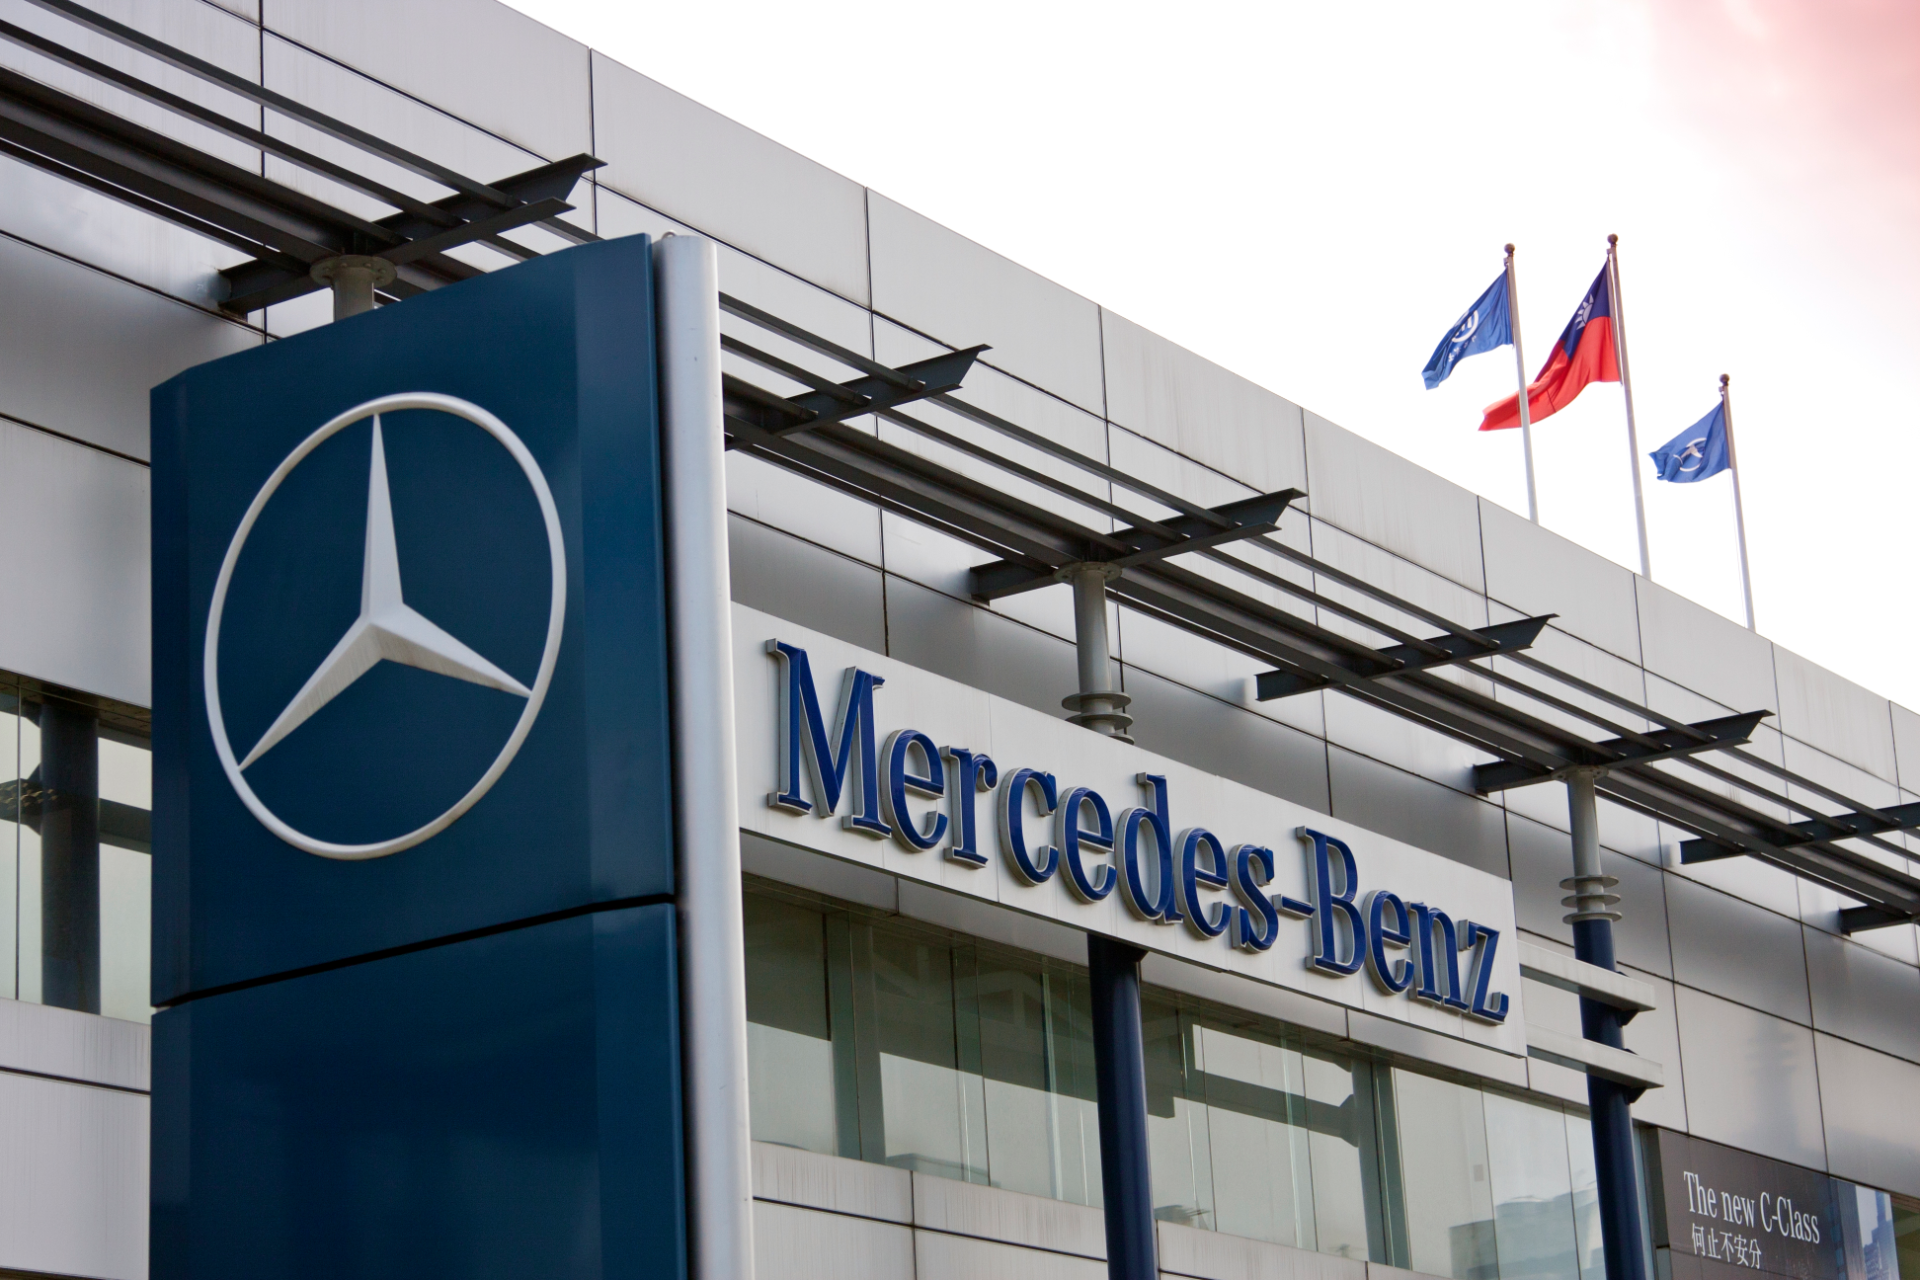 Signage and flags on a Mercedes-Benz dealership